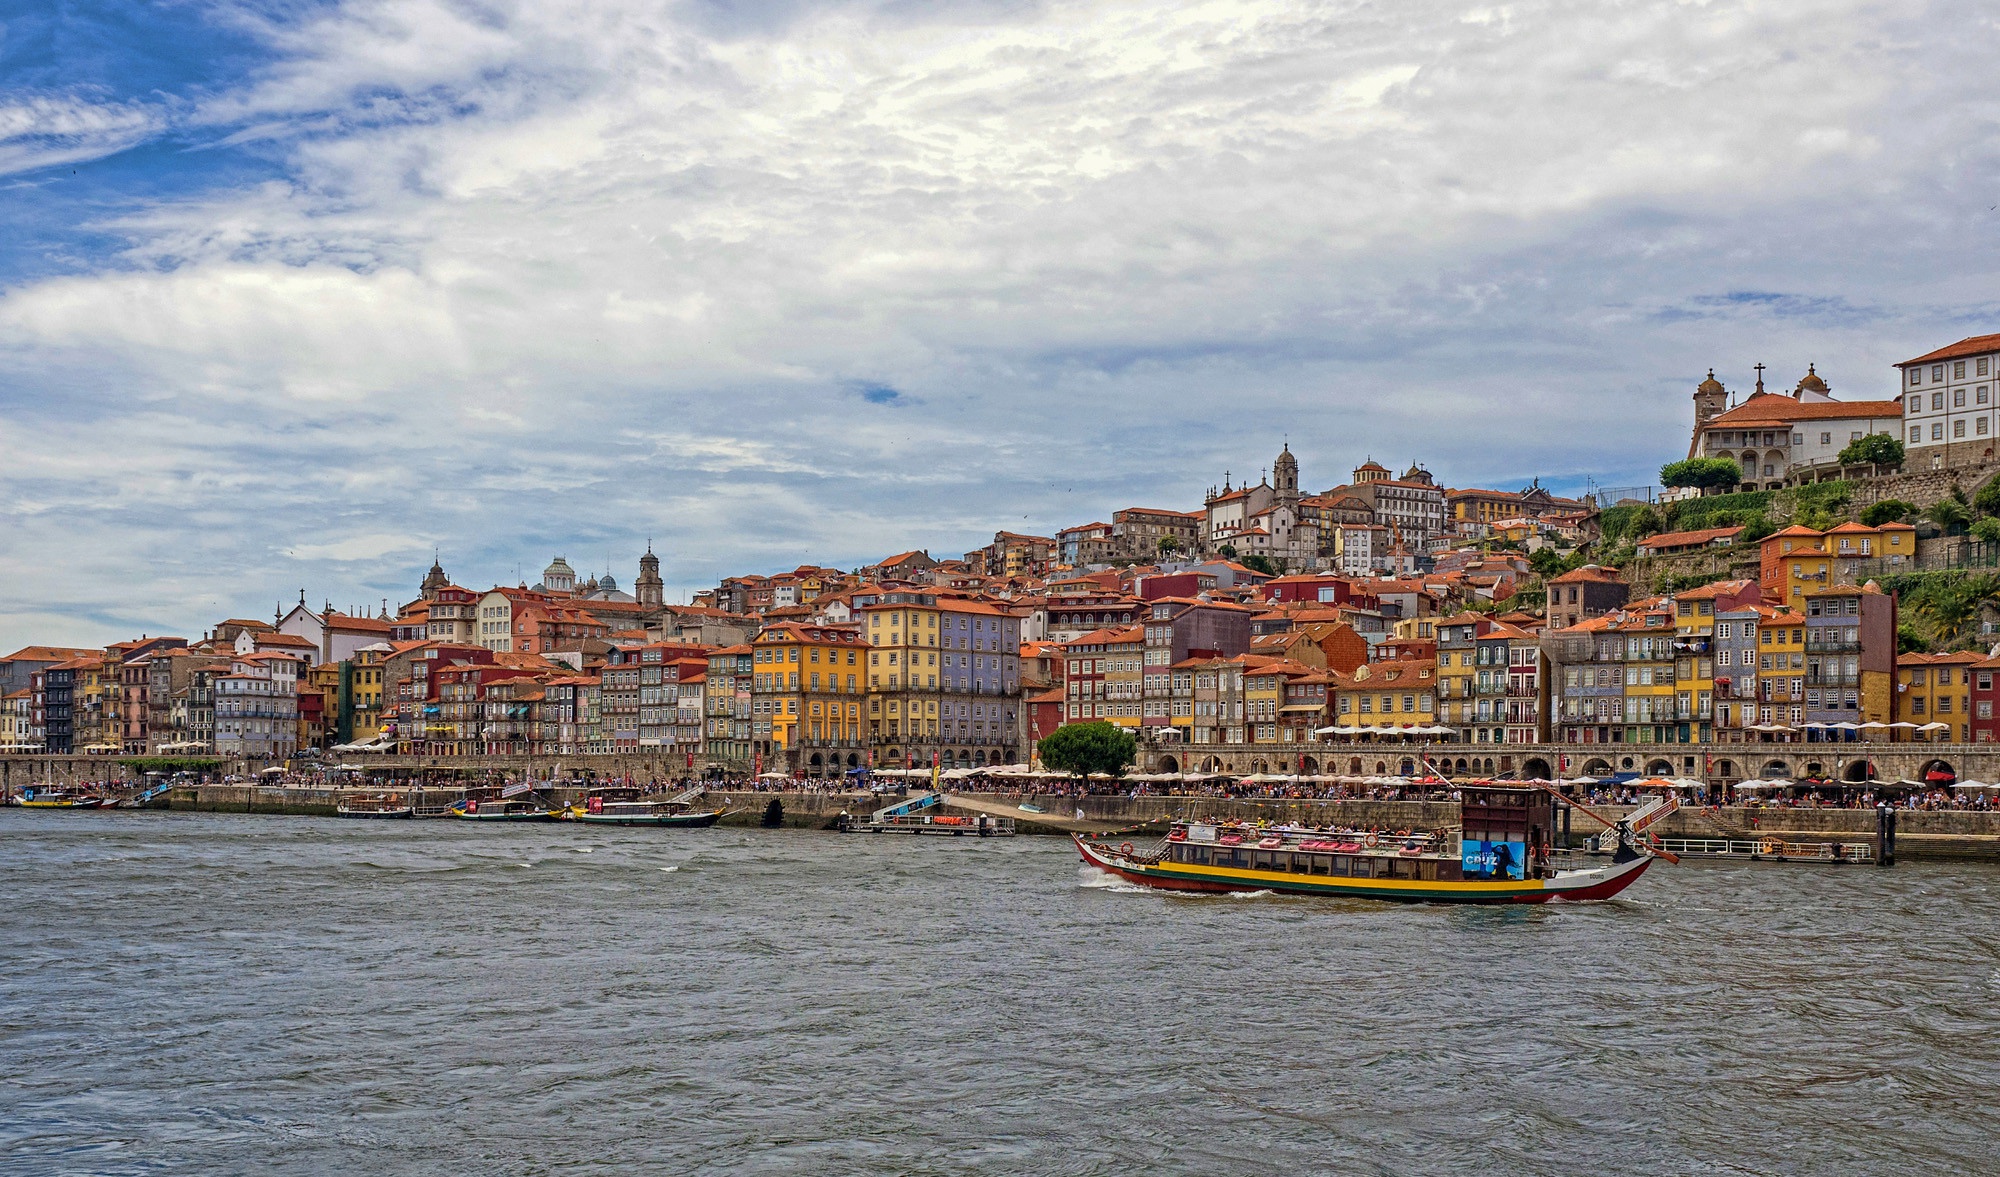 man made, porto, boat, building, house, portugal, river, cities